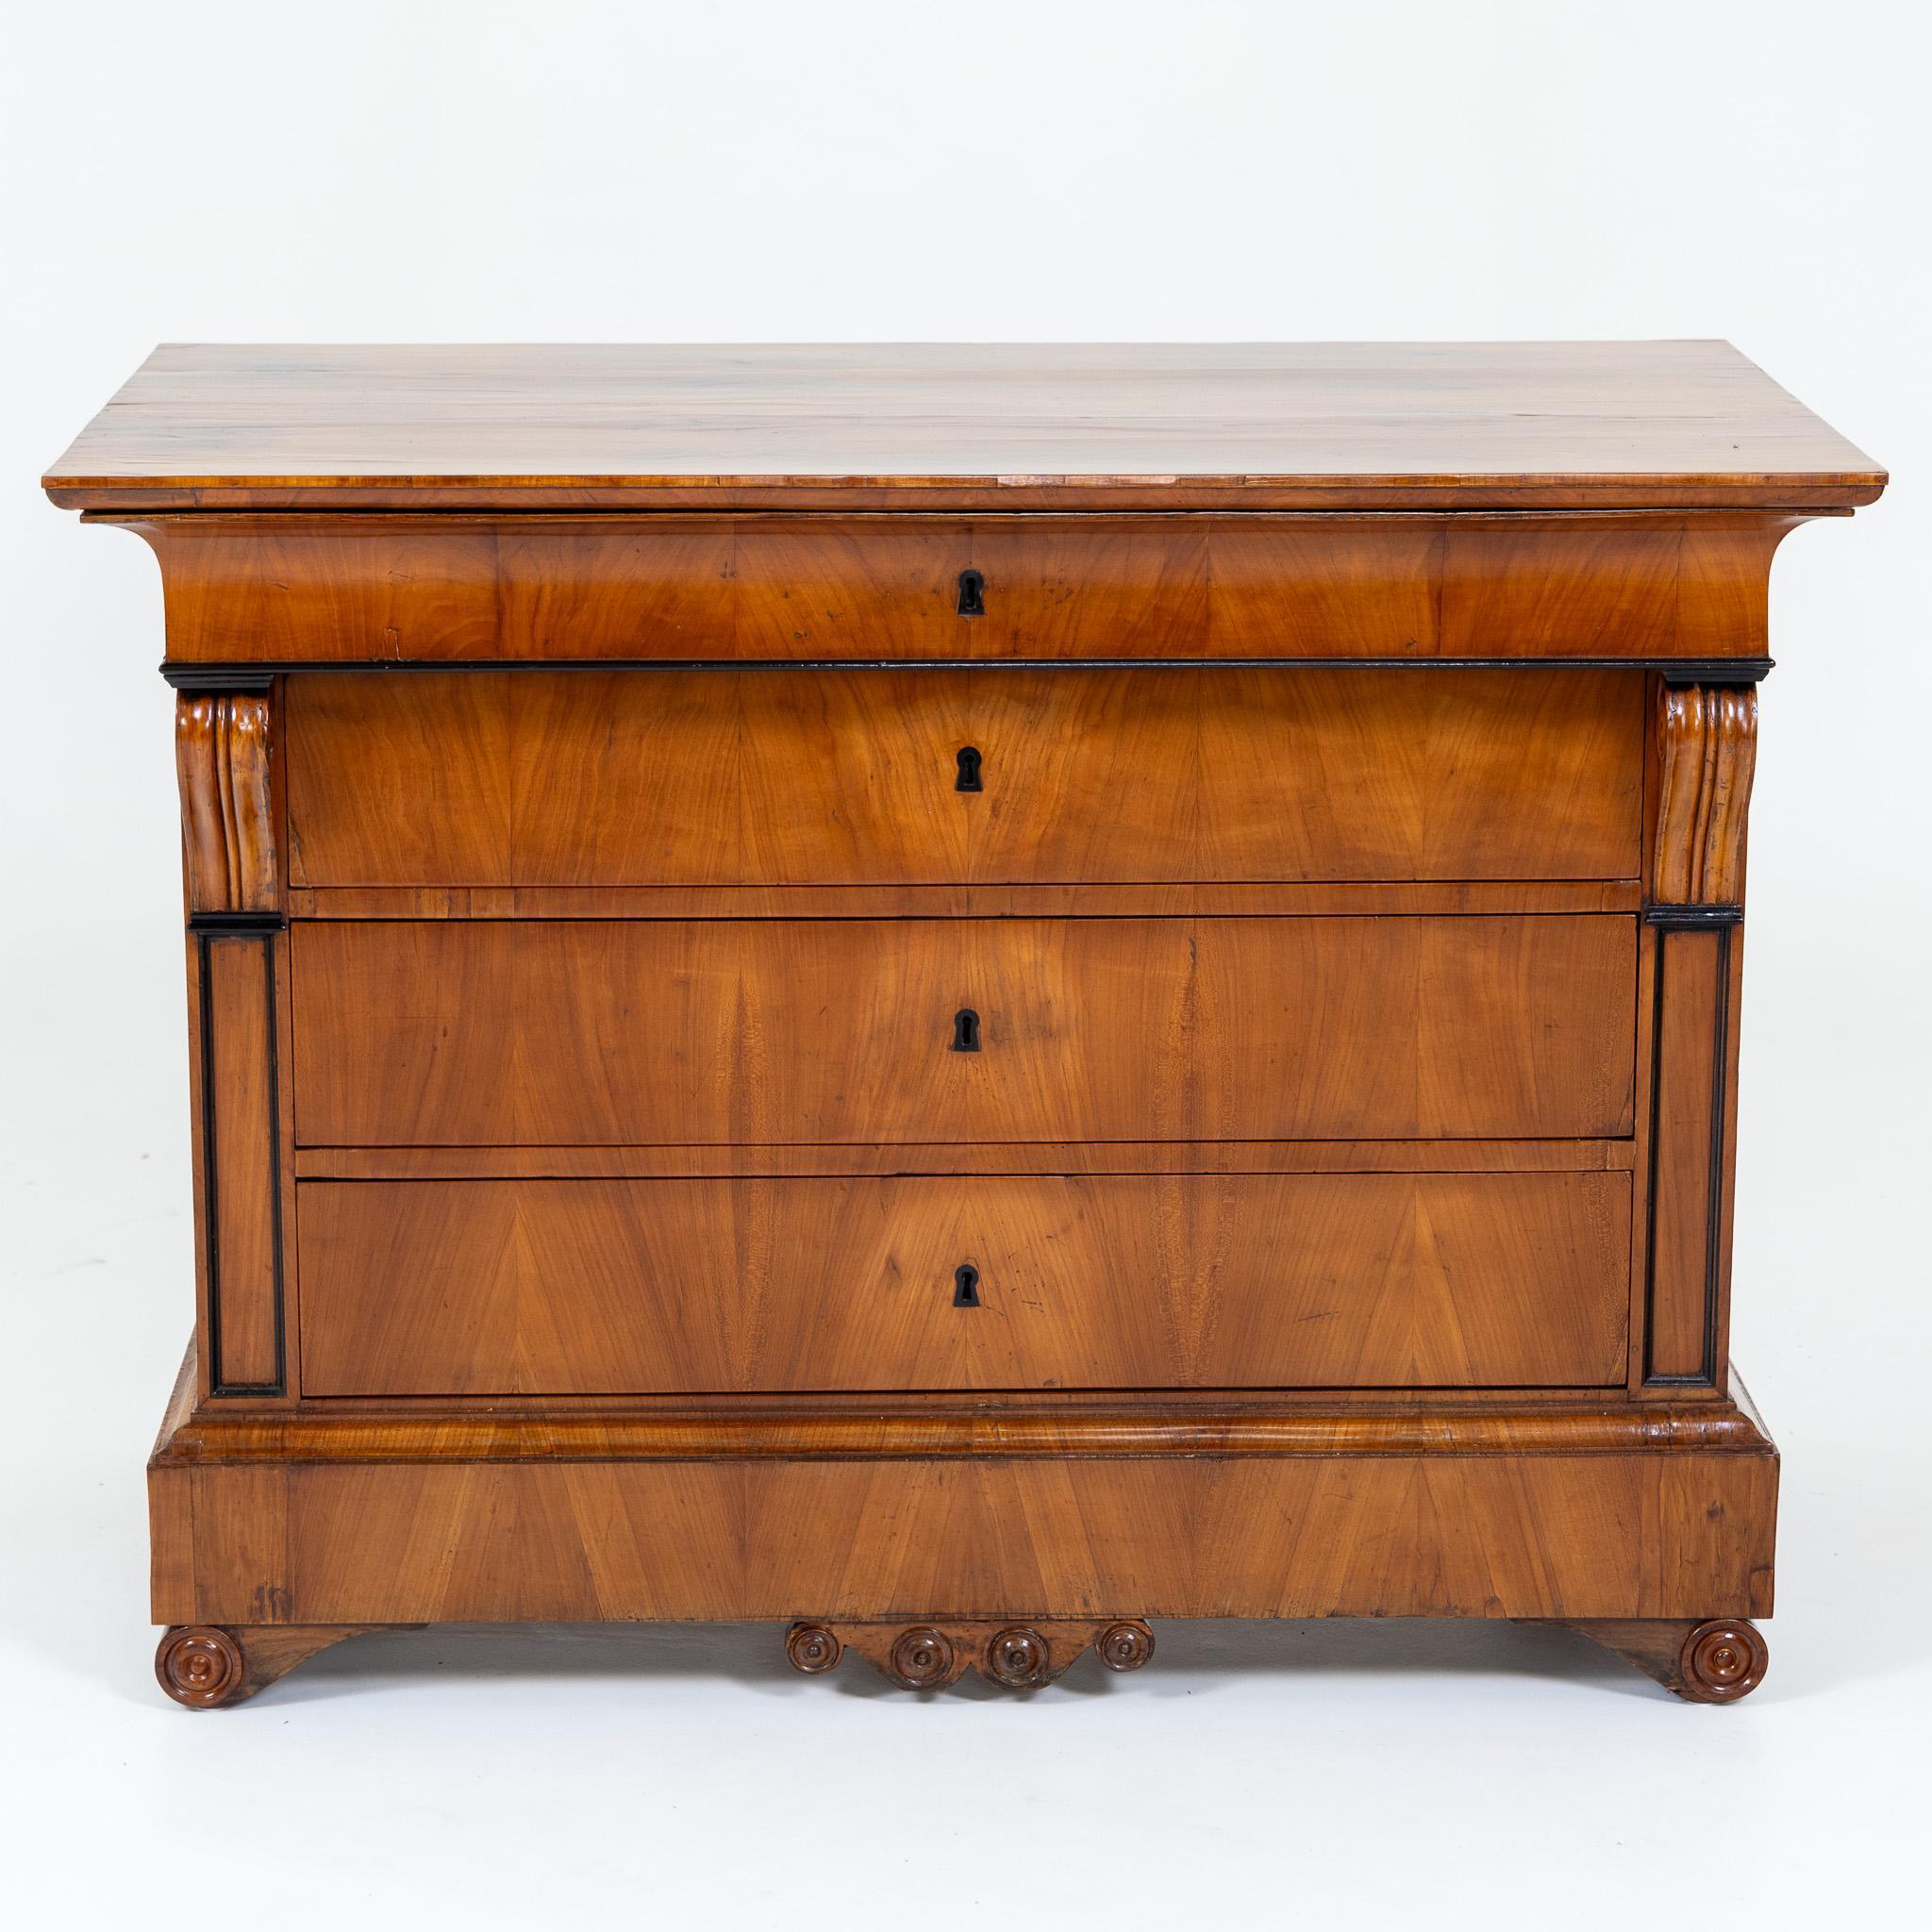 Polished Biedermeier Chest of Drawers, polished Cherry veneer, four drawers, circa 1830 For Sale